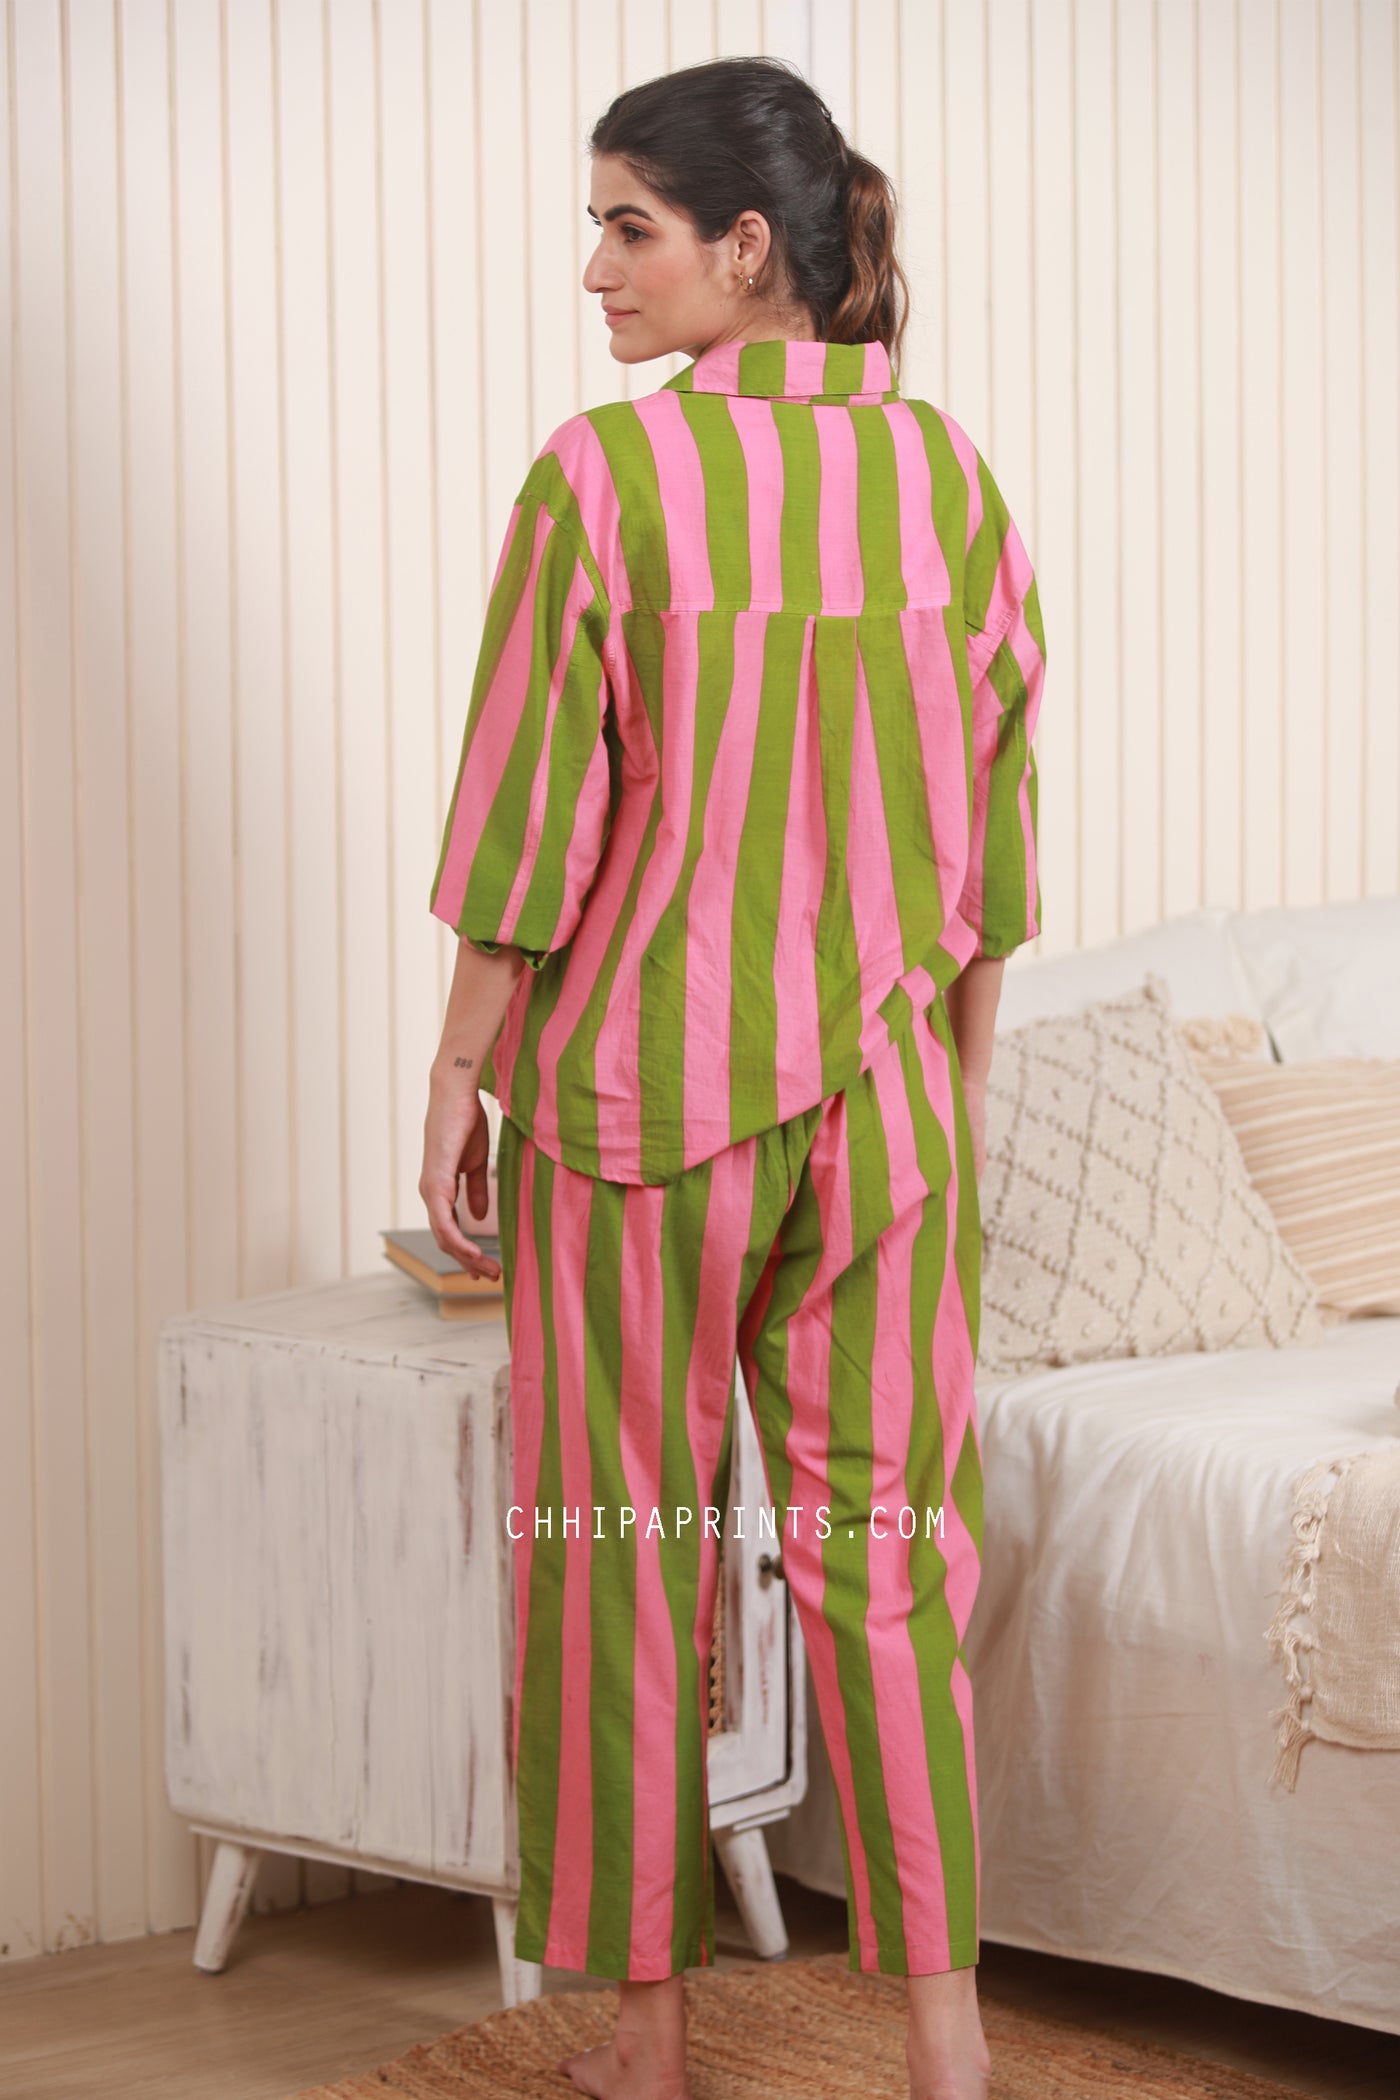 Cotton Stripe Print Co Ord Set in Shades of Green And Candy Floss